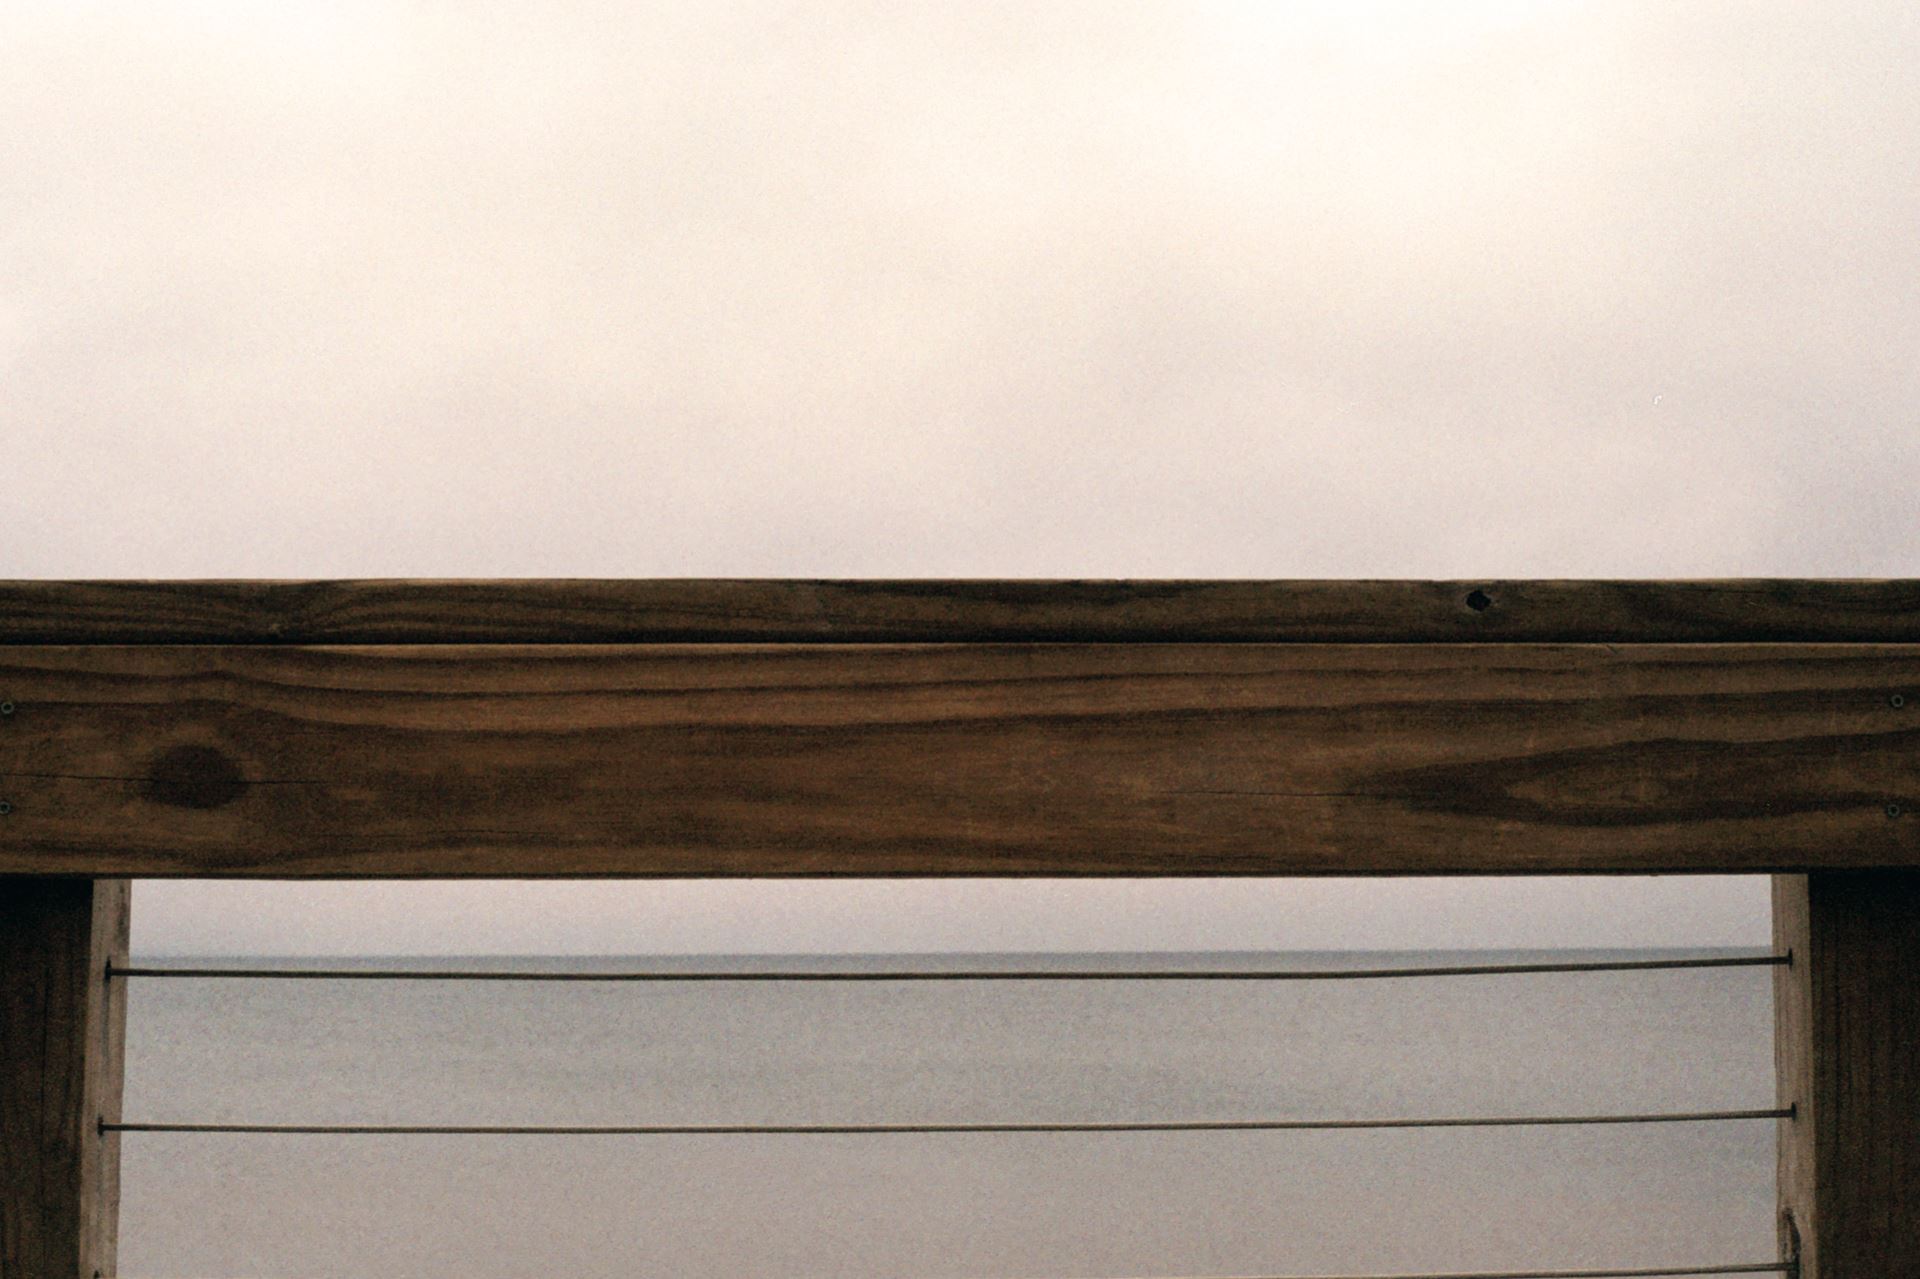 Close up section of wooden fence overlooking water and a gray sky. Emily Spaniol, “Beach Image 4,” film